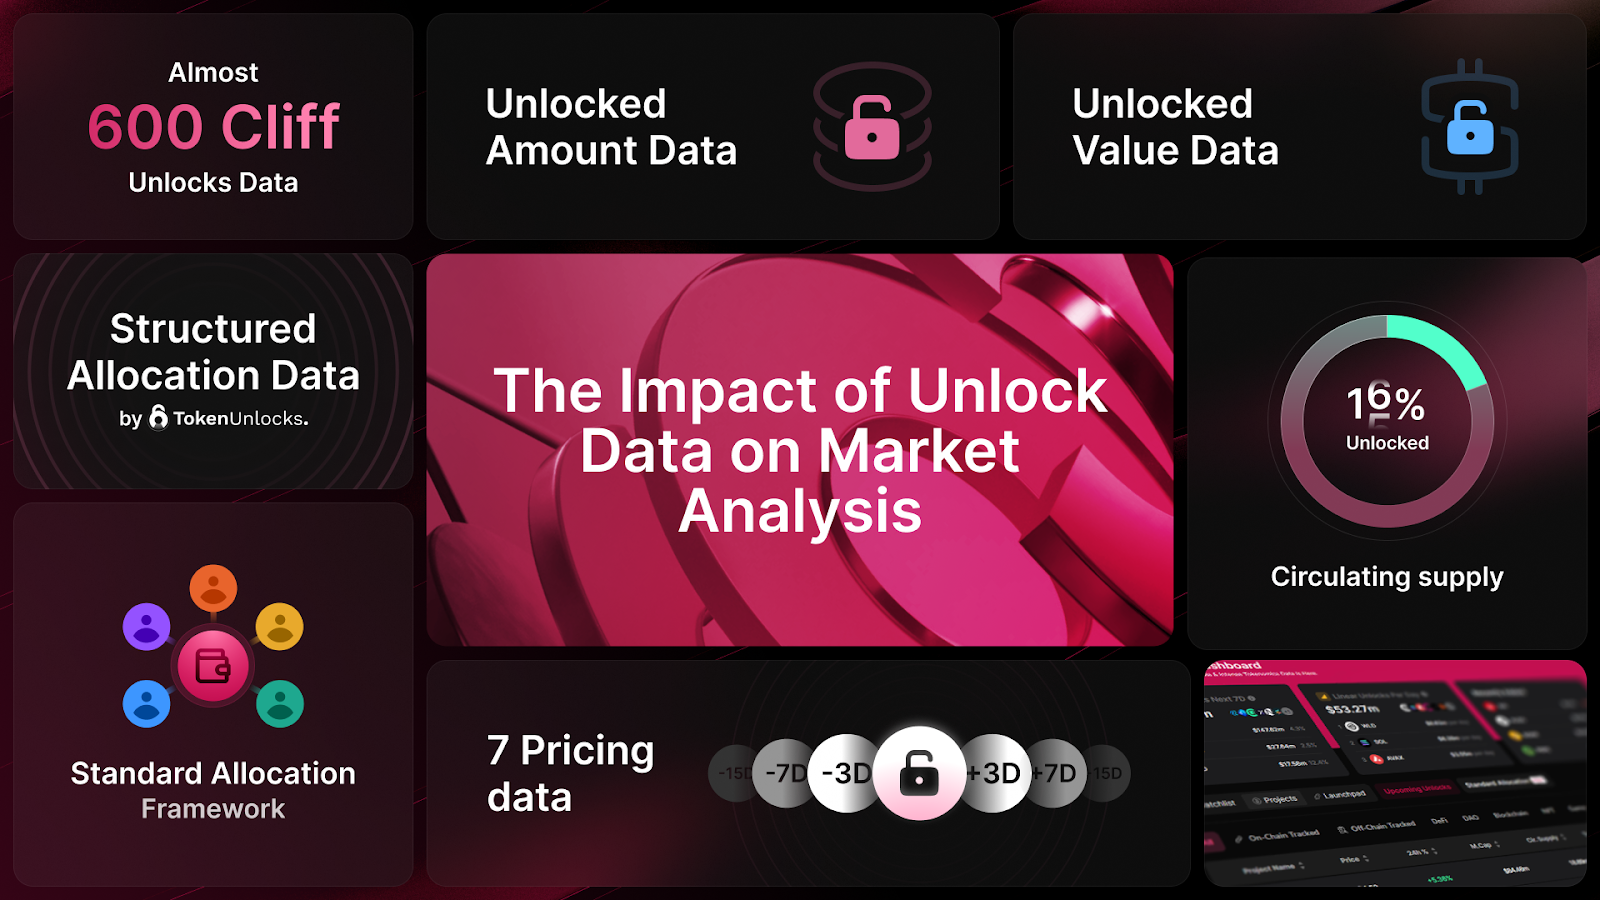 Price Impact of Unlock by Project Types